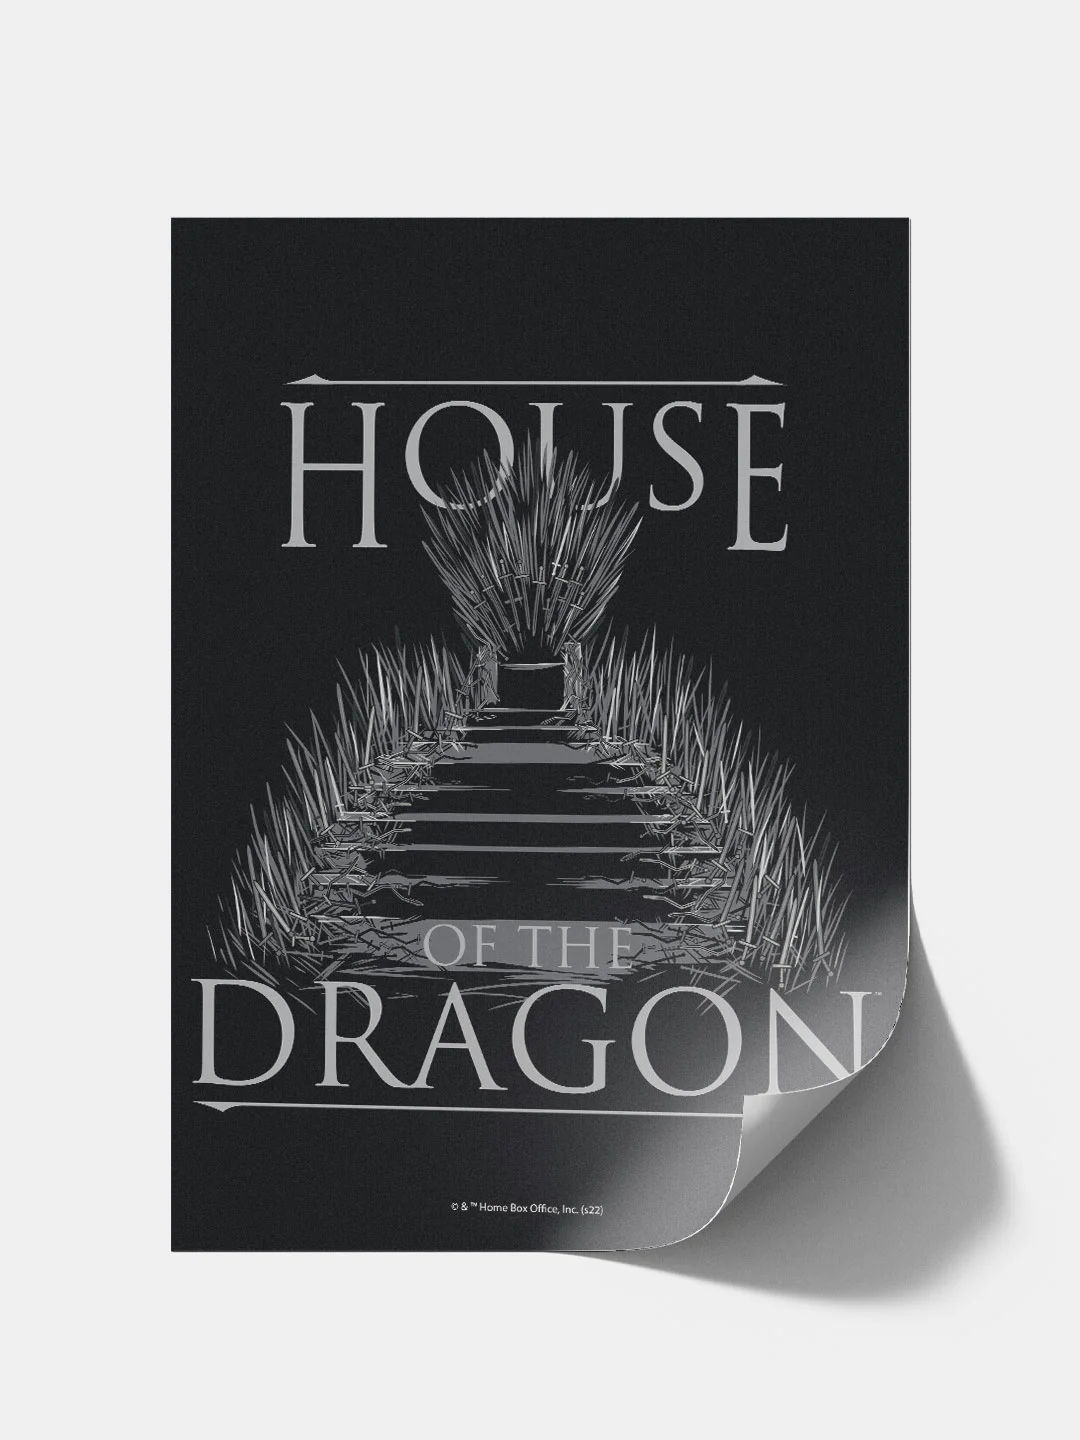 Buy Iron Throne Graphic - Posters Posters Online